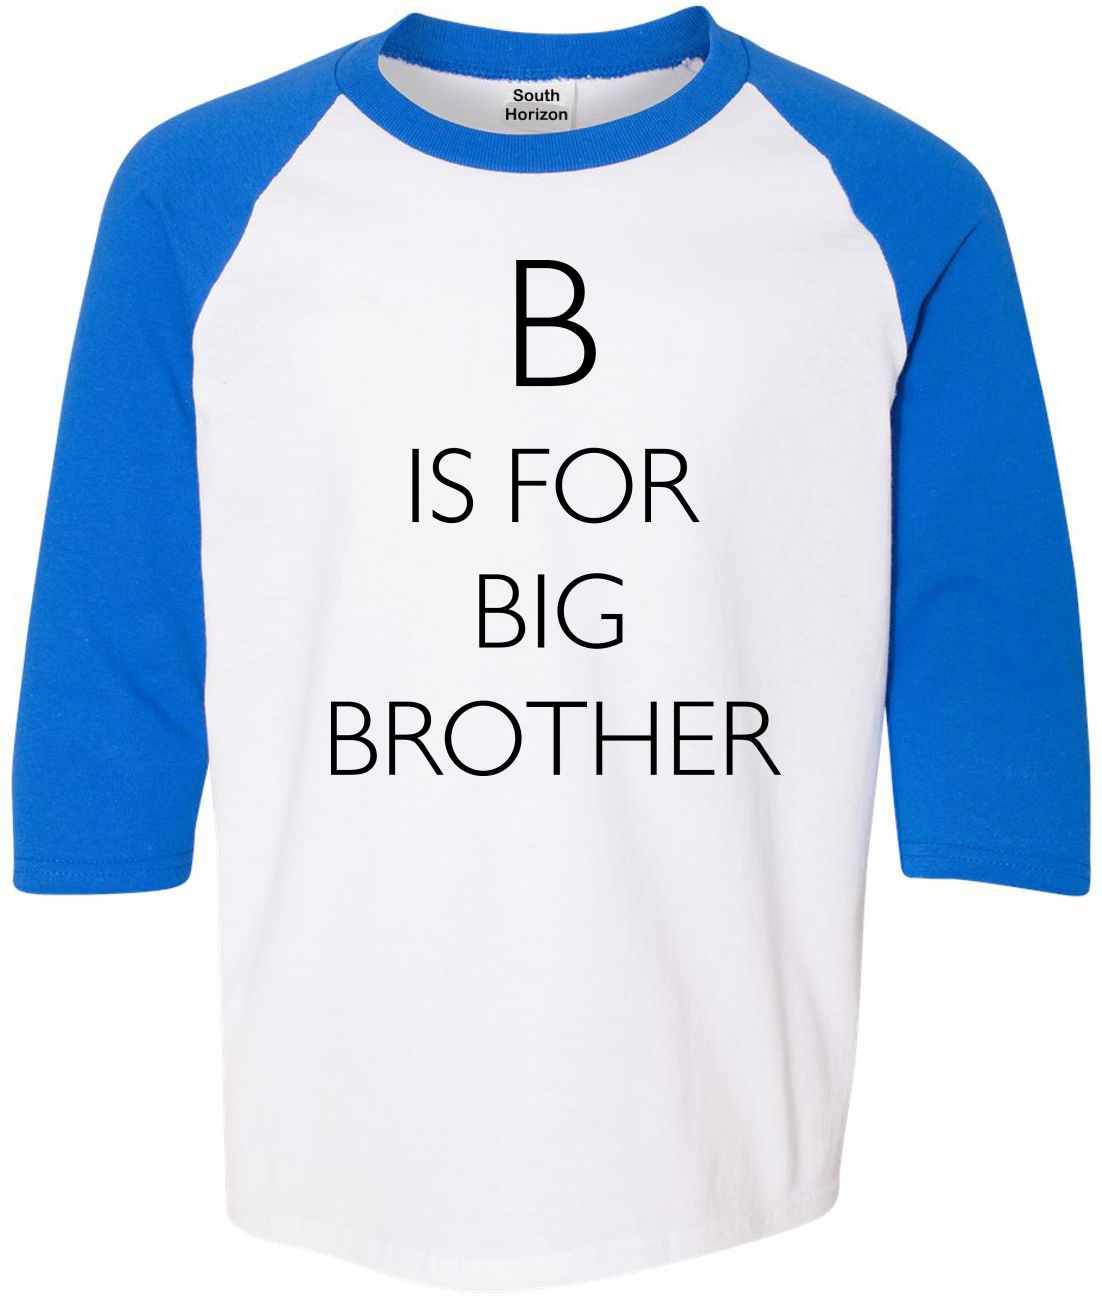 B is for Big Brother Youth Baseball (#1179-212)